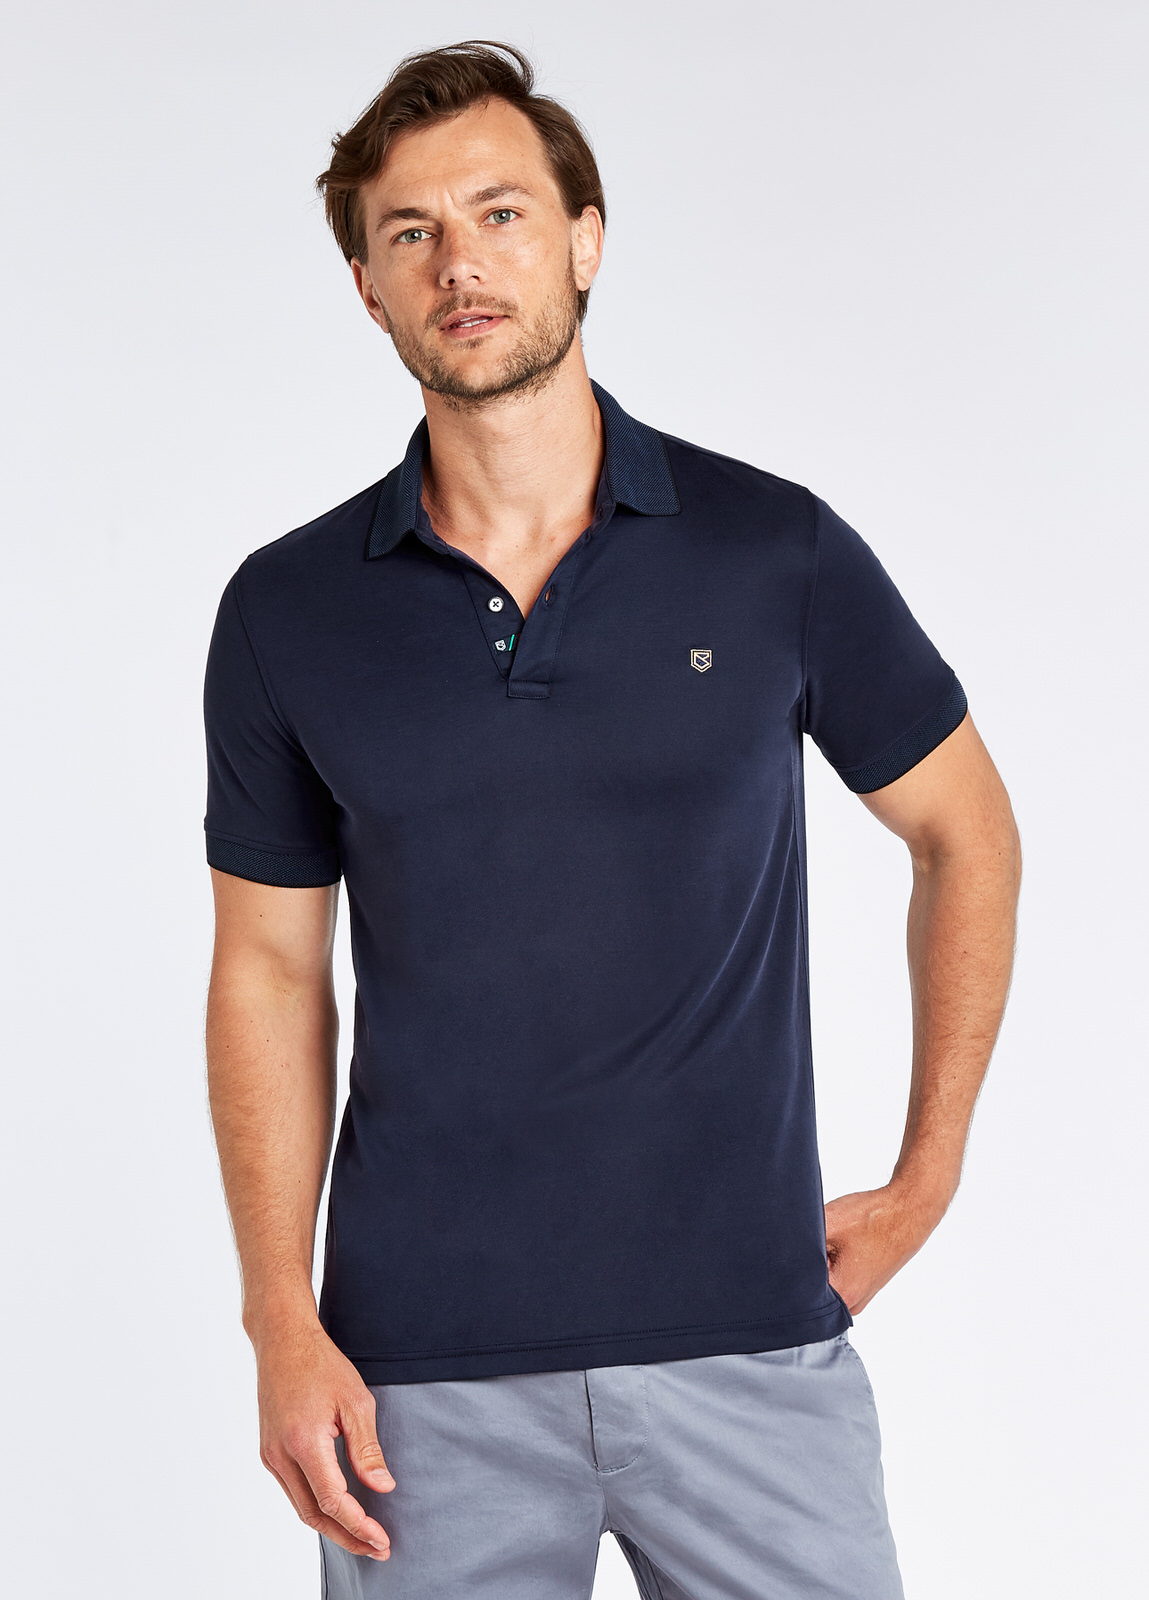 Parnell Polo - Navy